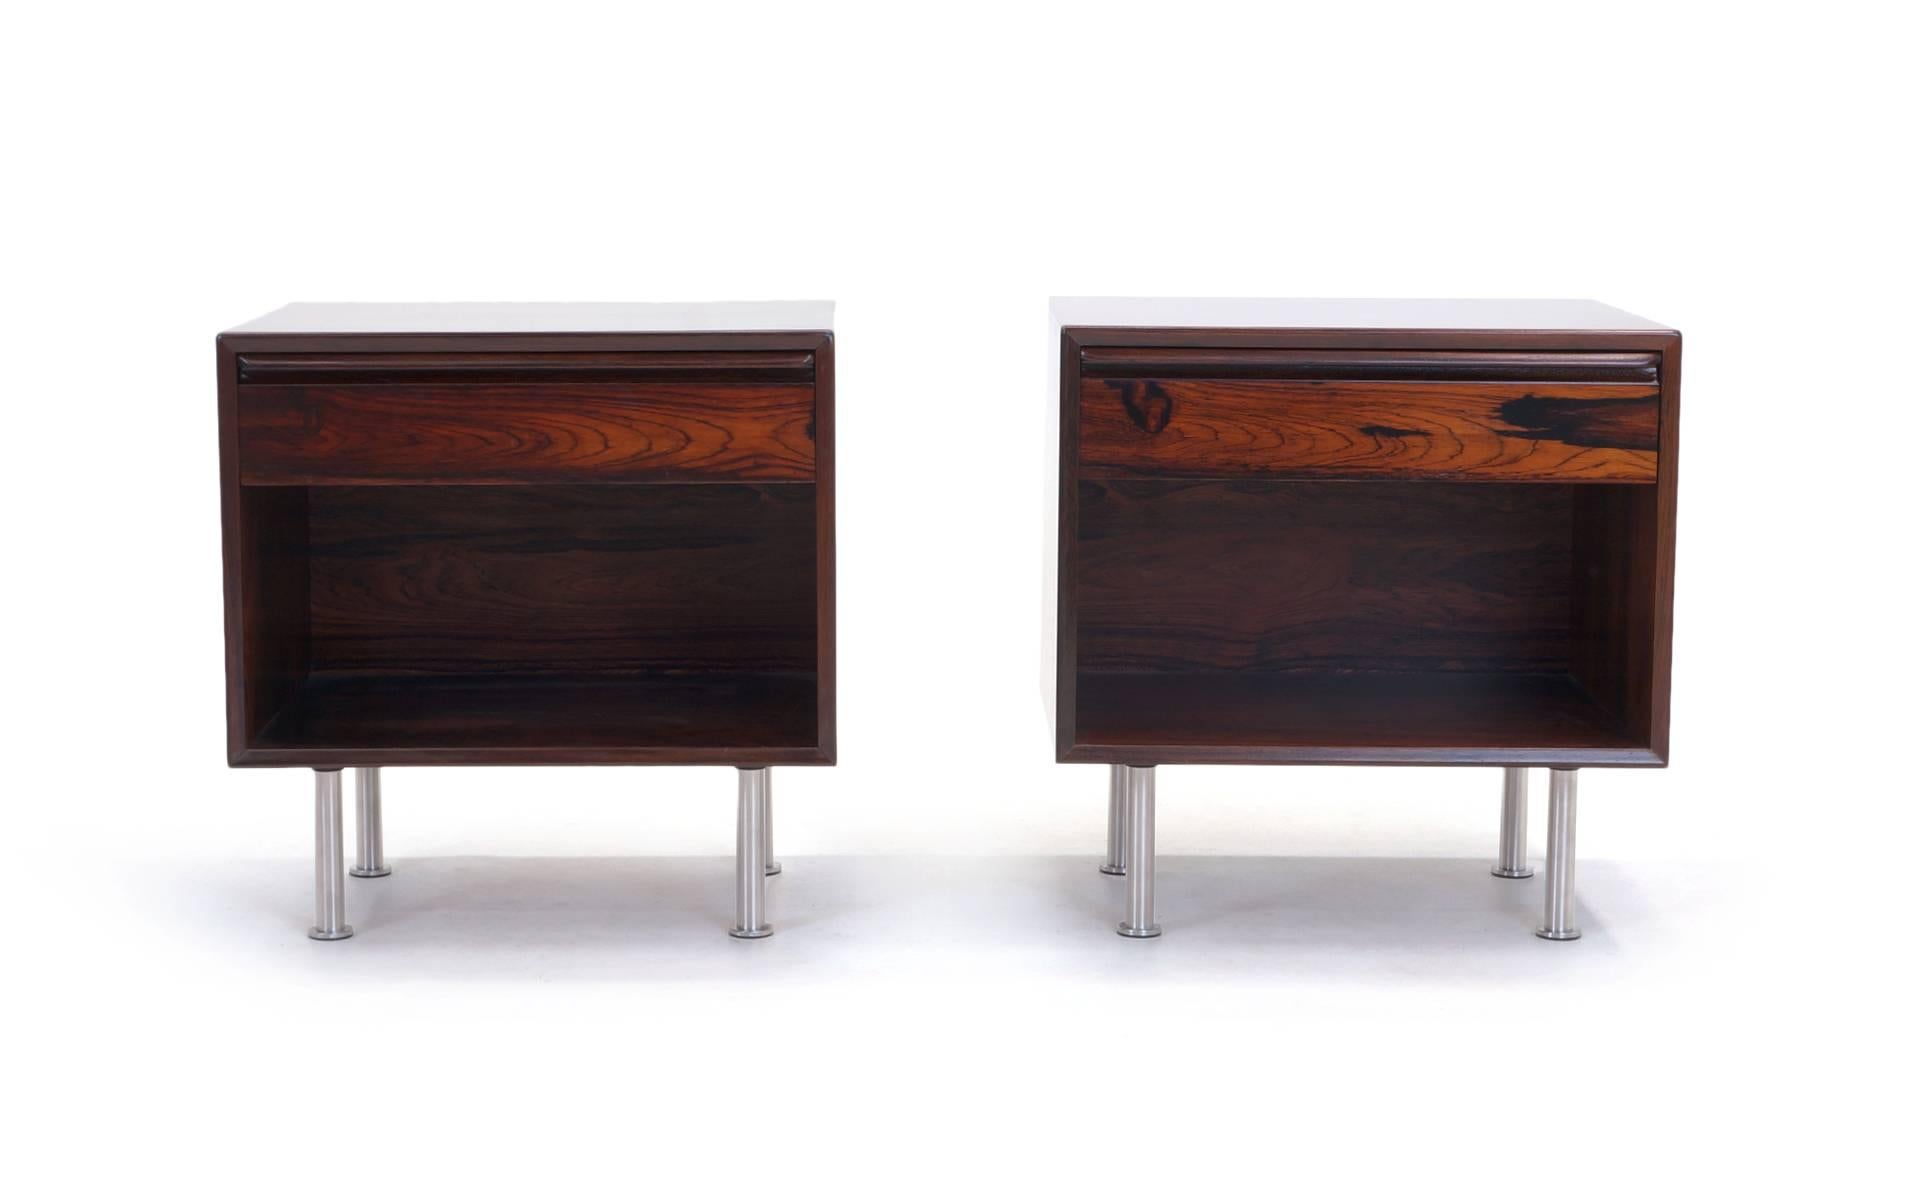 Beautiful pair of Brazilian rosewood bedside tables manufactured by Westnova, Norway, 1960s. Each has a single drawer and open storage below. New brushed aluminum legs. Excellent condition.